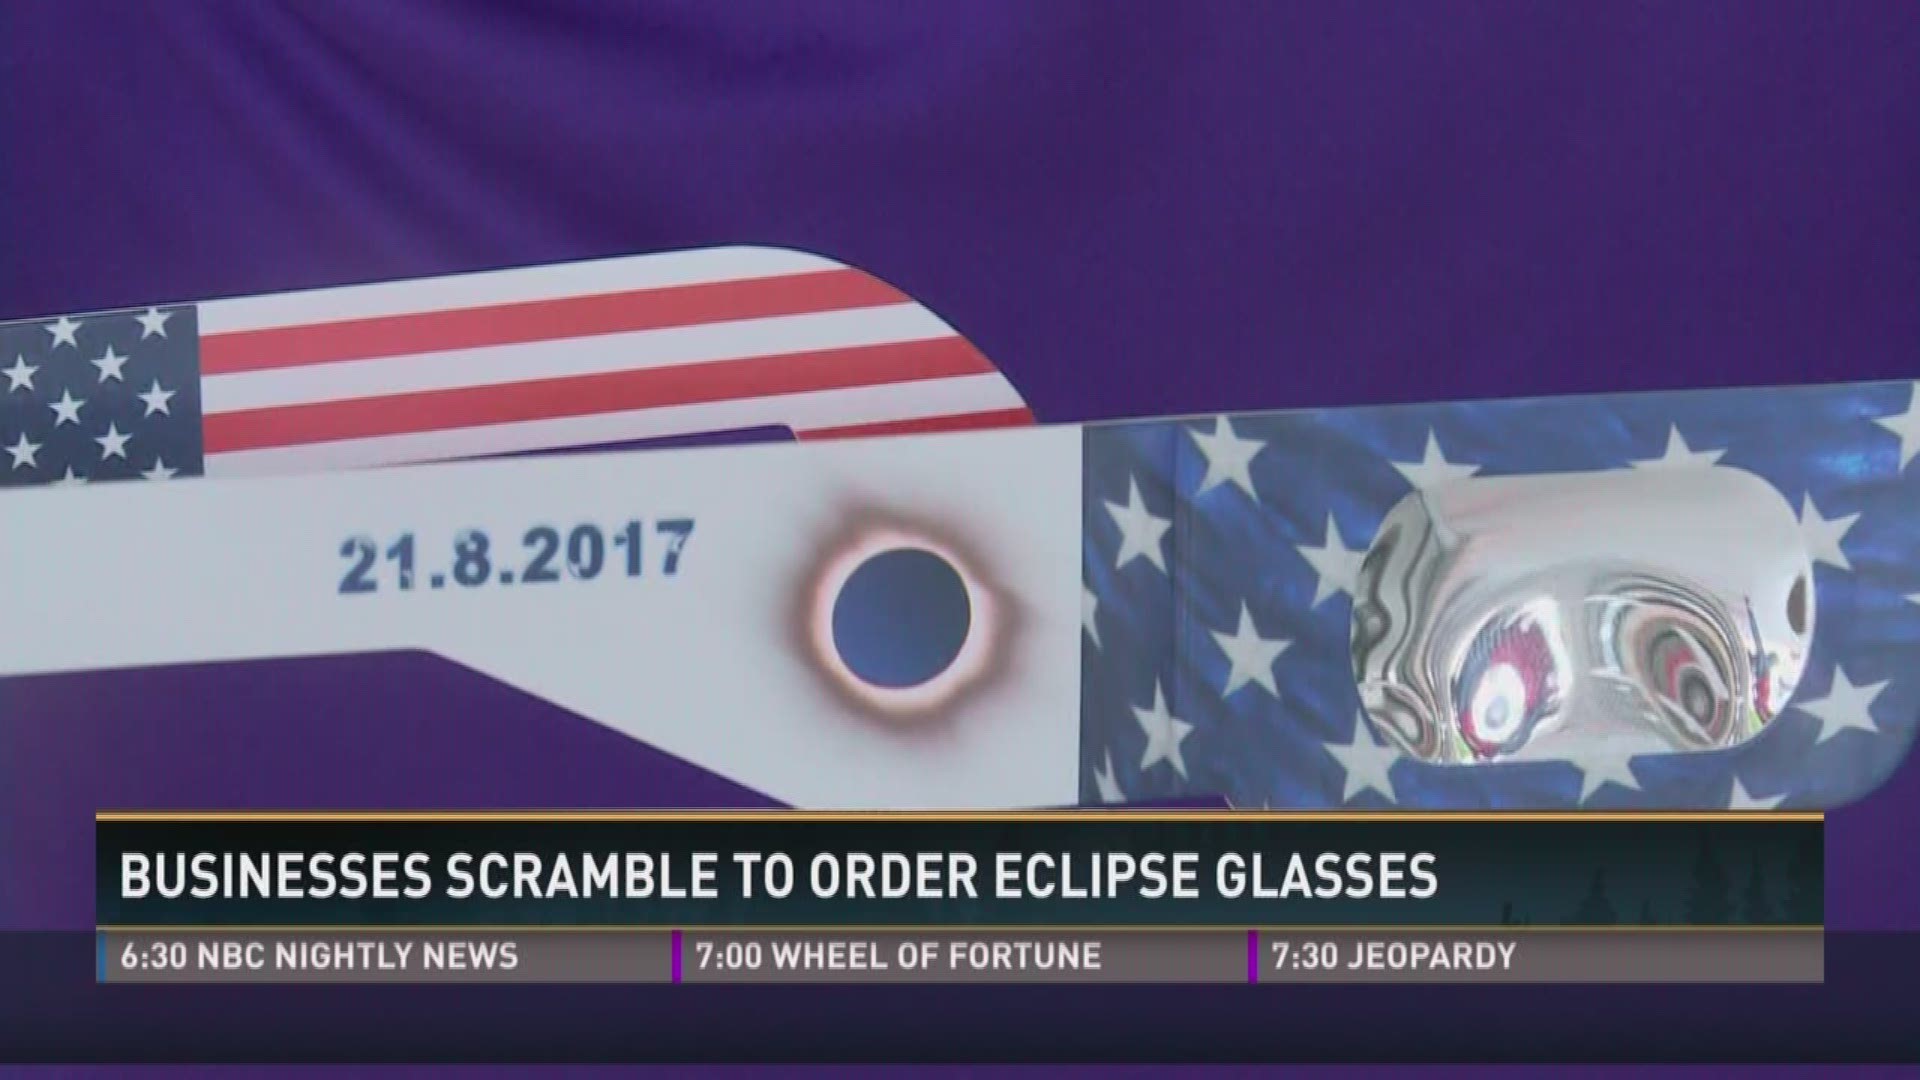 Aug. 11, 2017: Businesses all around Knoxville are scrambling to order more eclipse glasses ahead of the Aug. 21 total solar eclipse.